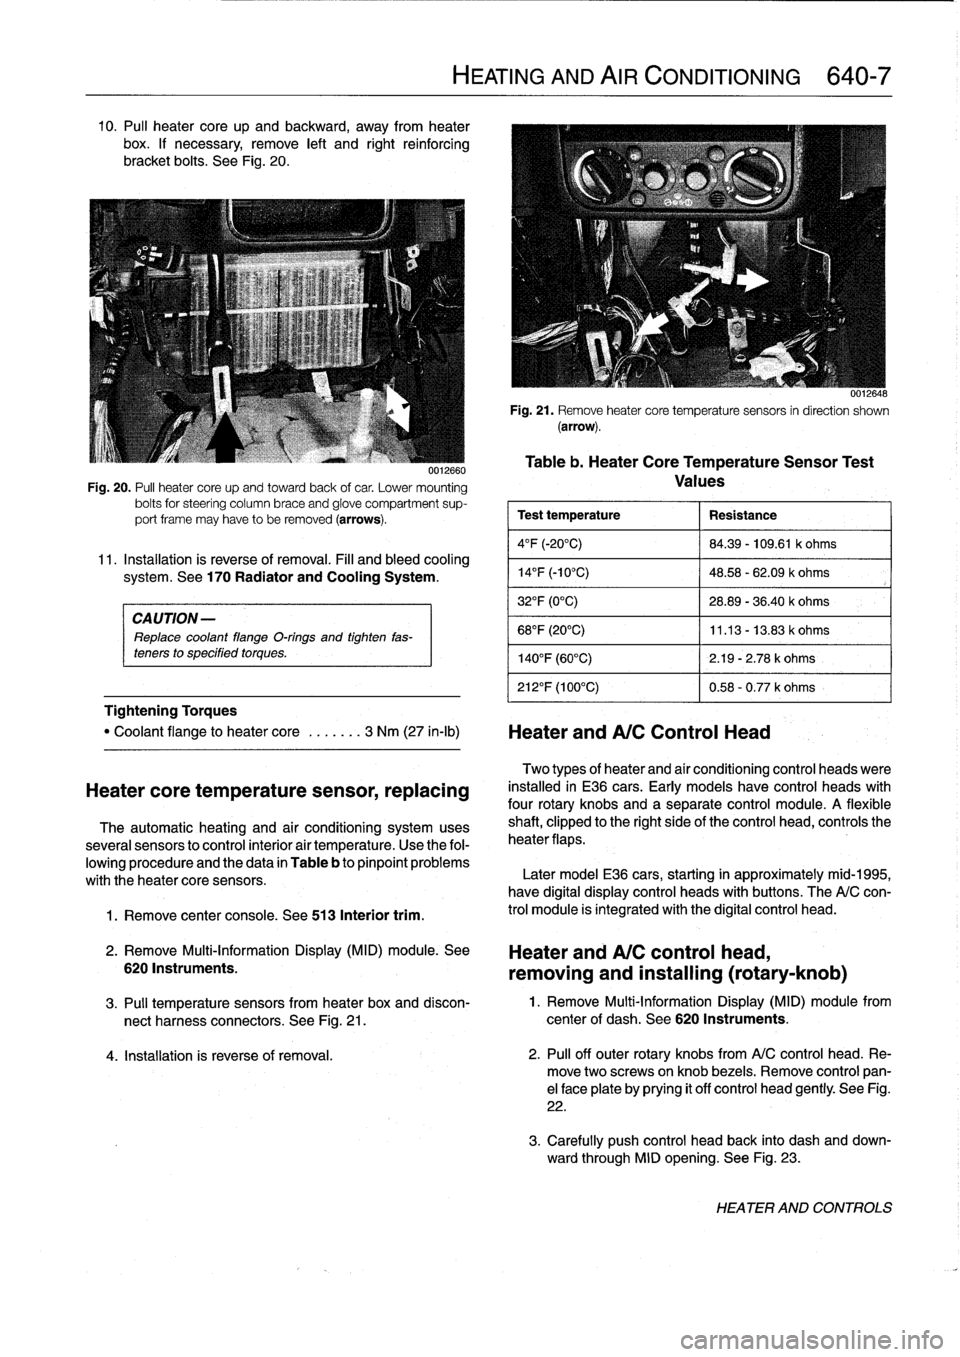 BMW 318i 1997 E36 Workshop Manual 10
.
Pul¡
heater
core
up
and
backward,
away
from
heater
box
.
If
necessary,
remove
left
and
right
reinforcing
bracket
bolts
.
See
Fig
.
20
.

CAUTION-

Replace
coolant
flange
O-rings
and
tighten
fas-